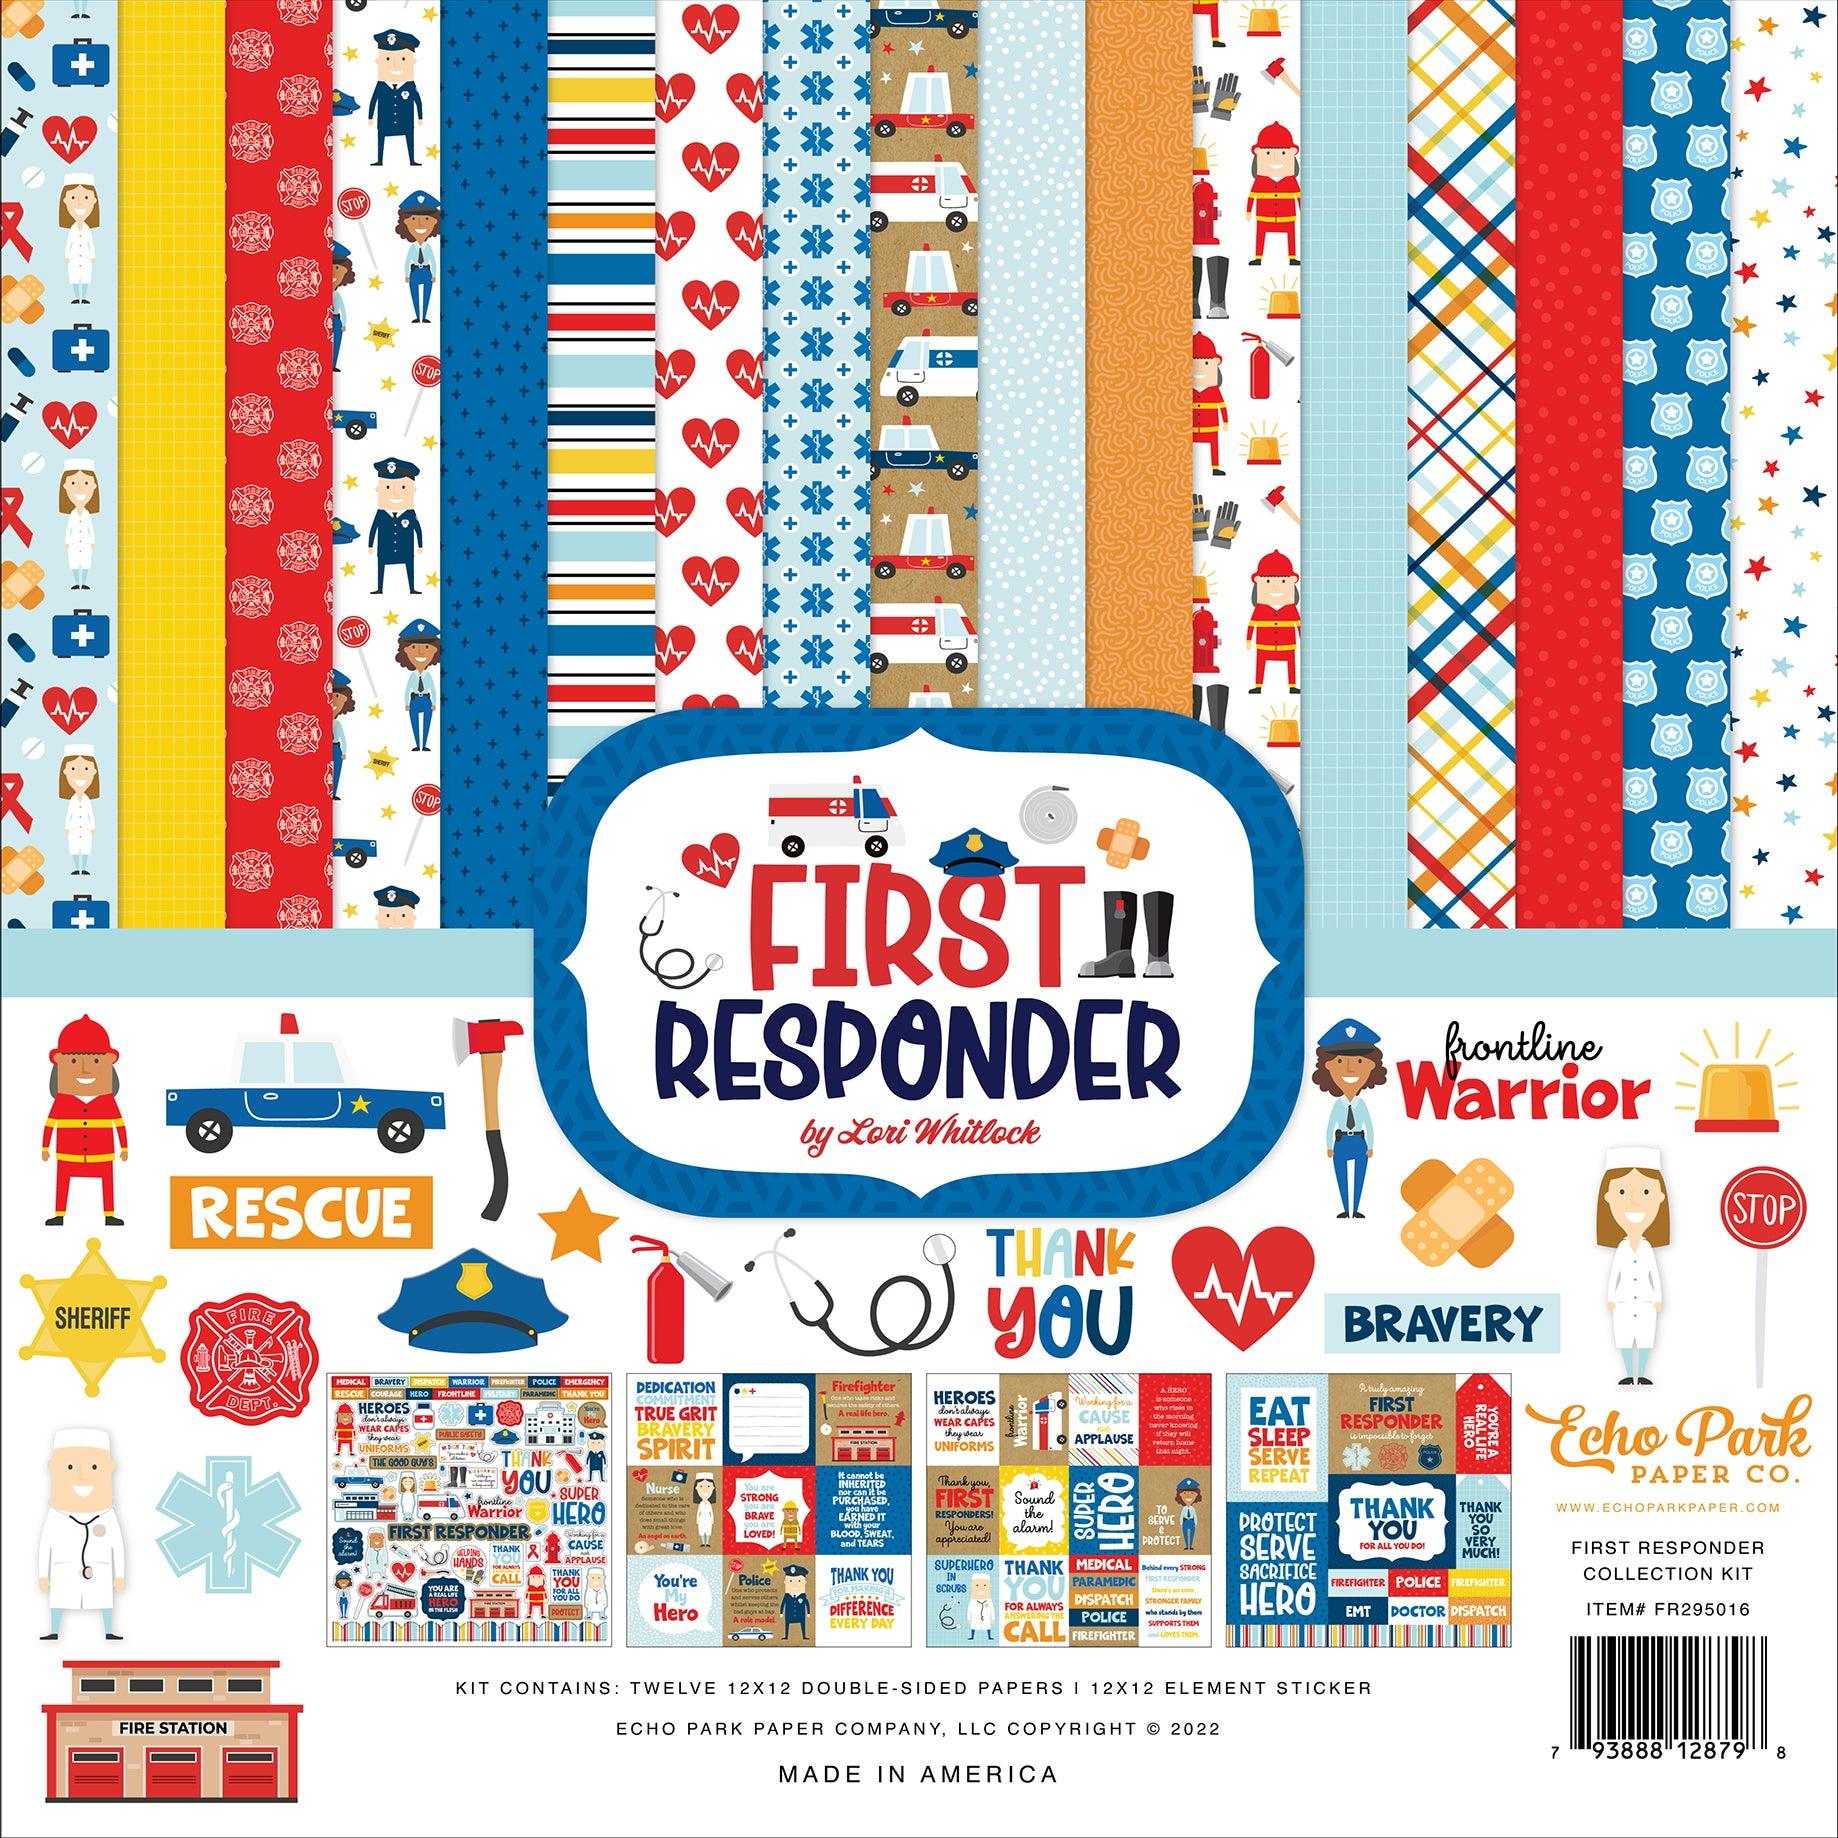 First Responder Collection 13-Piece Collection Kit by Echo Park Paper